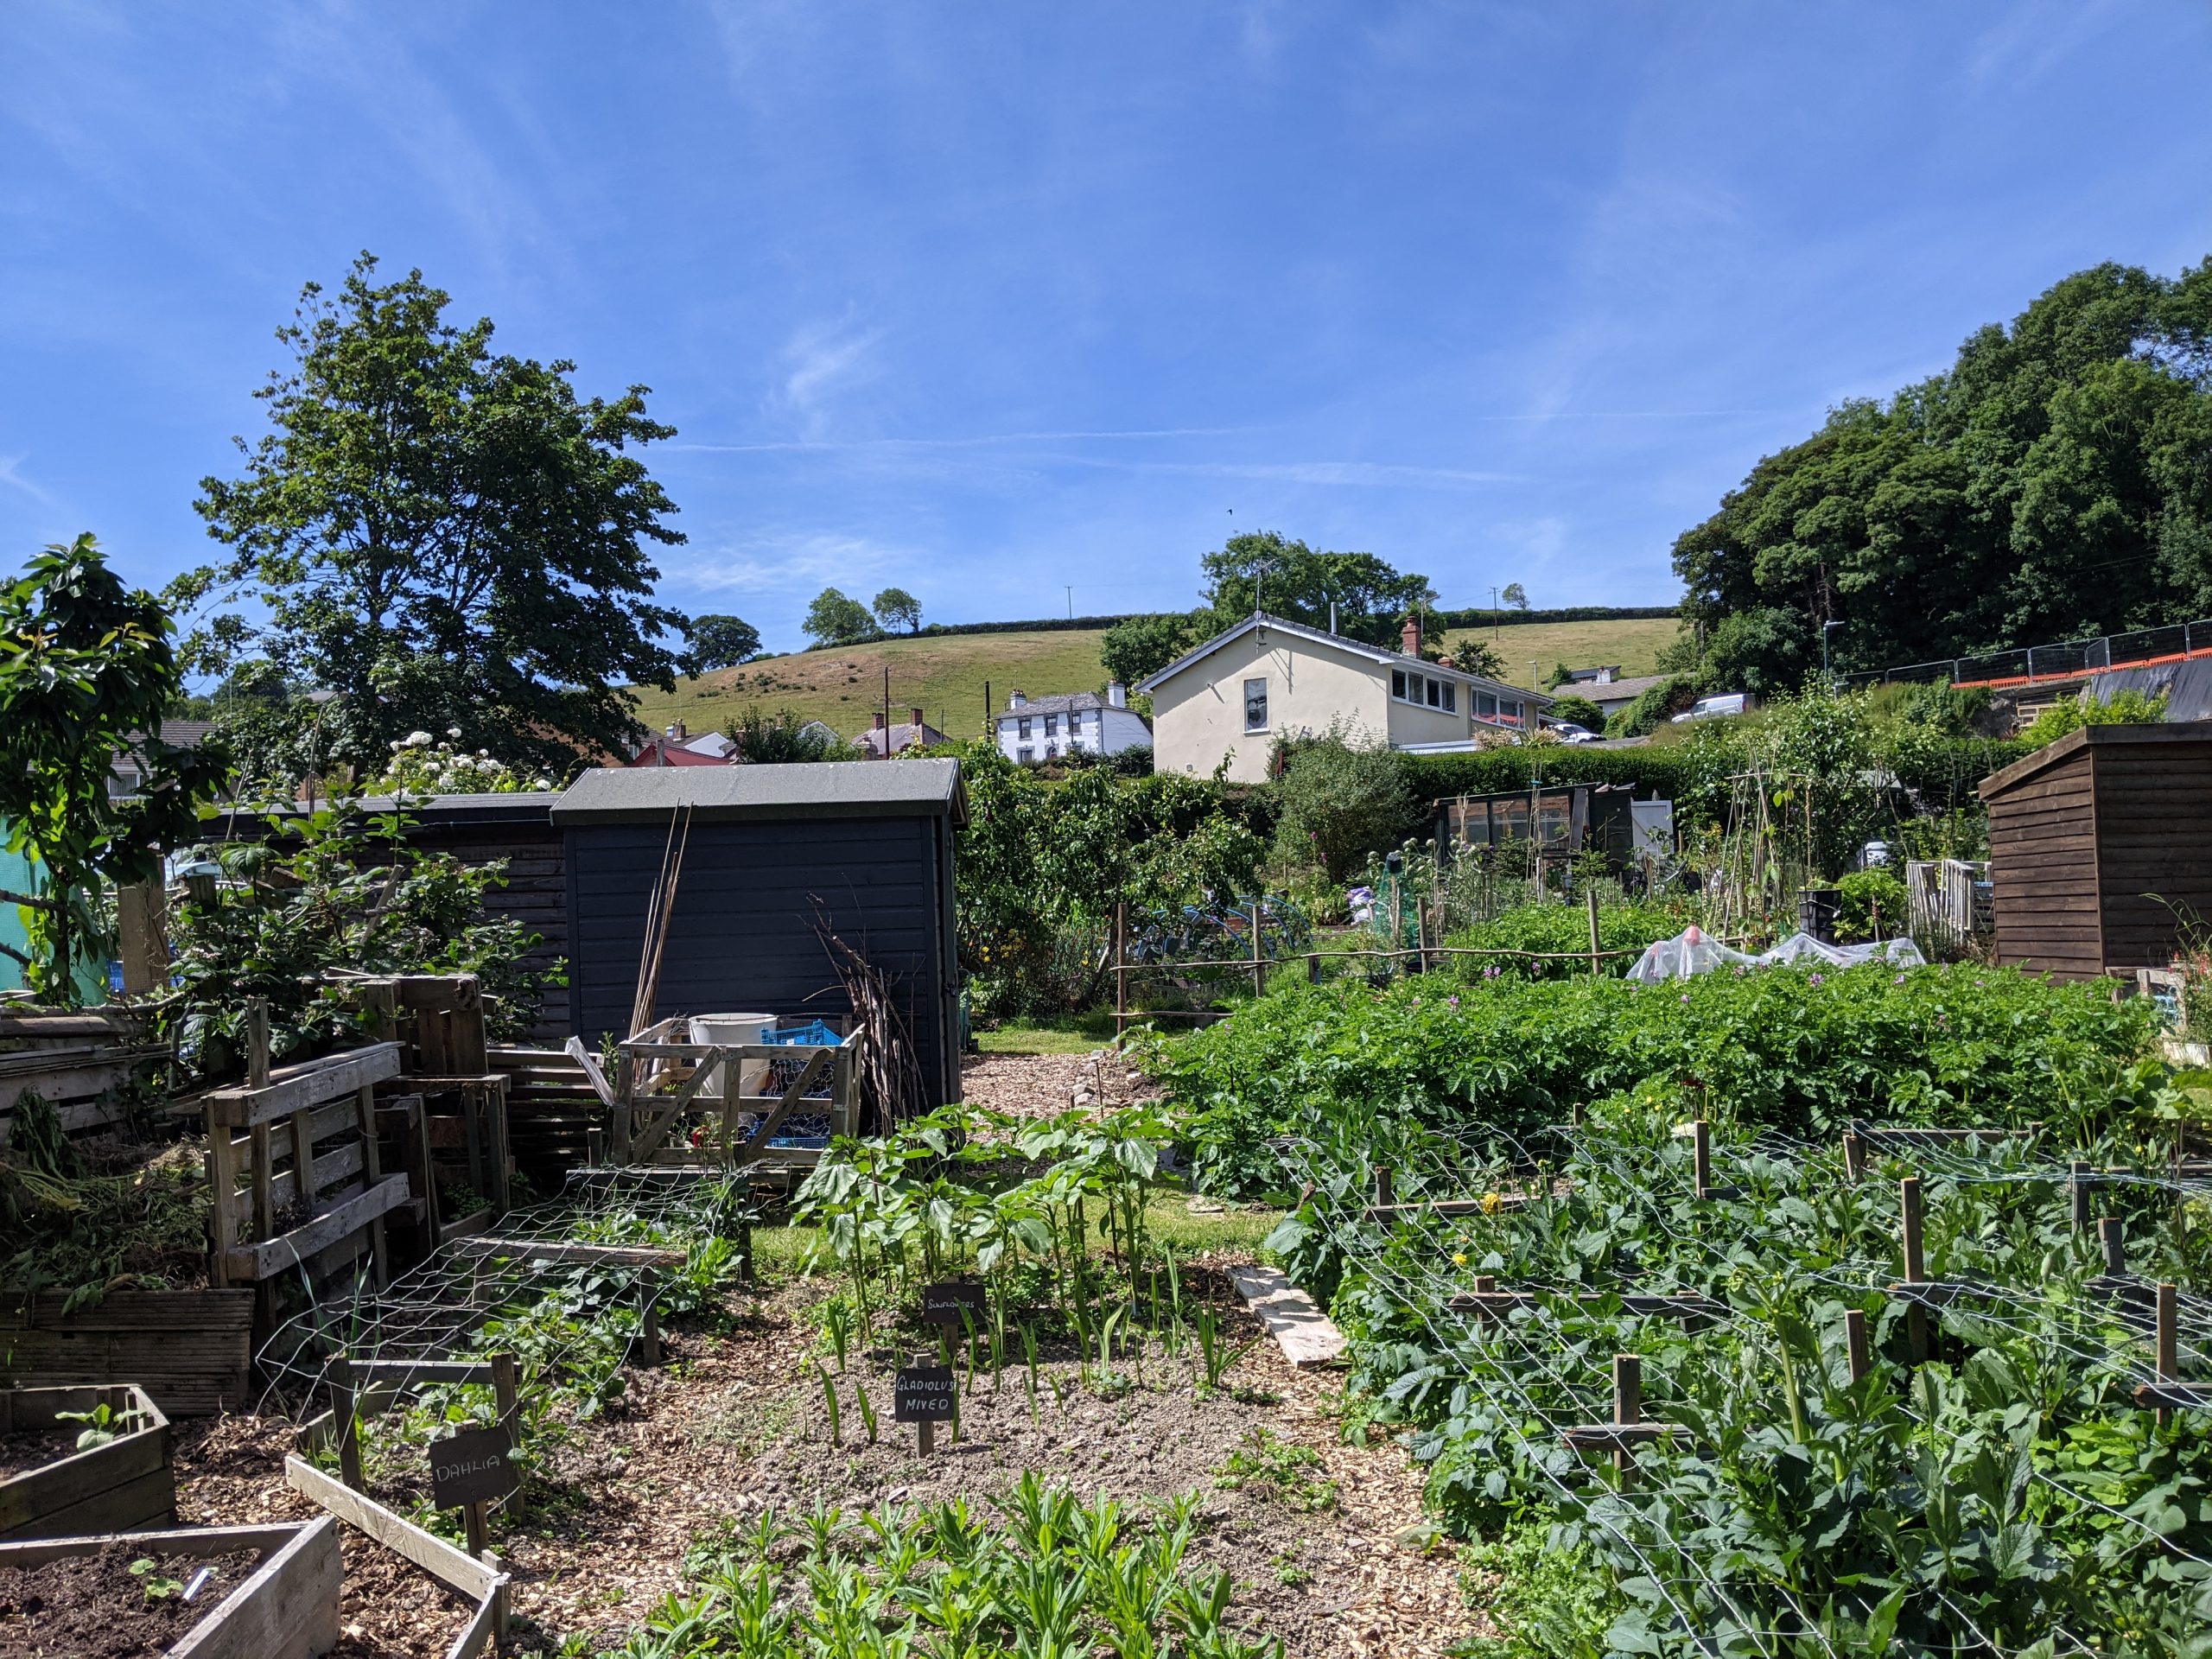 Allotment garden with a shed and buildings and hills in the background.